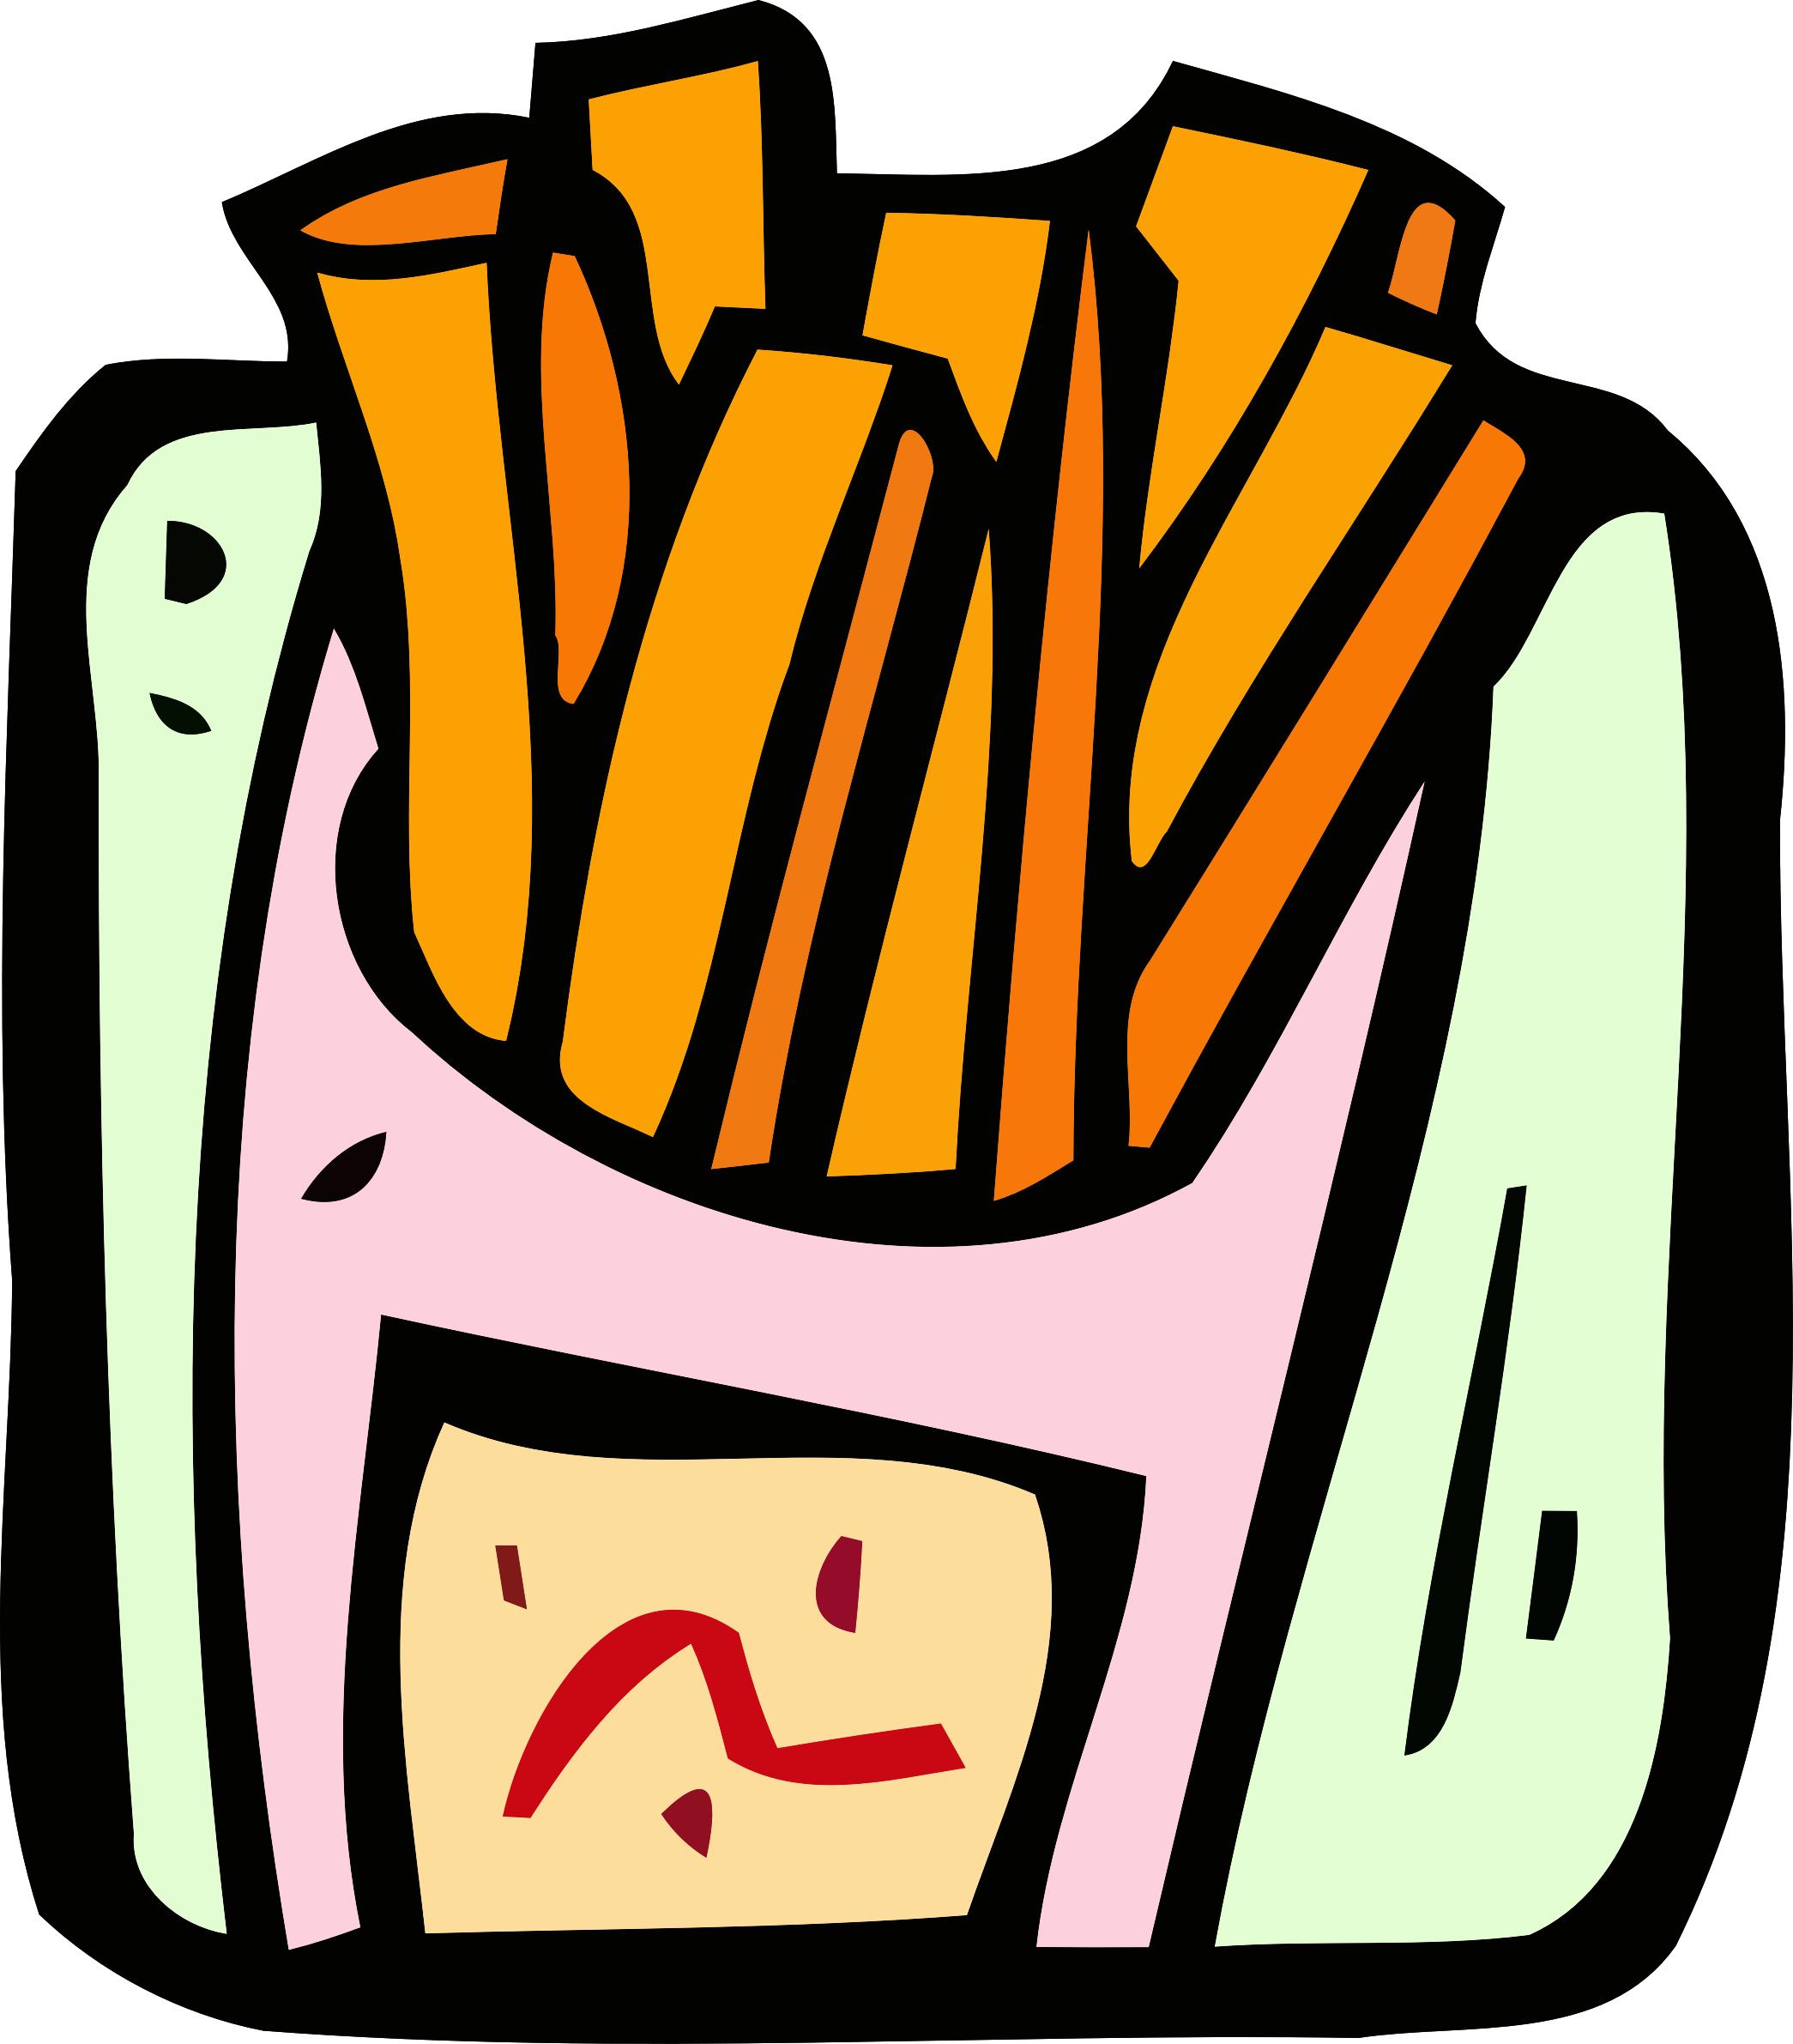 Food and drink icon - fries png